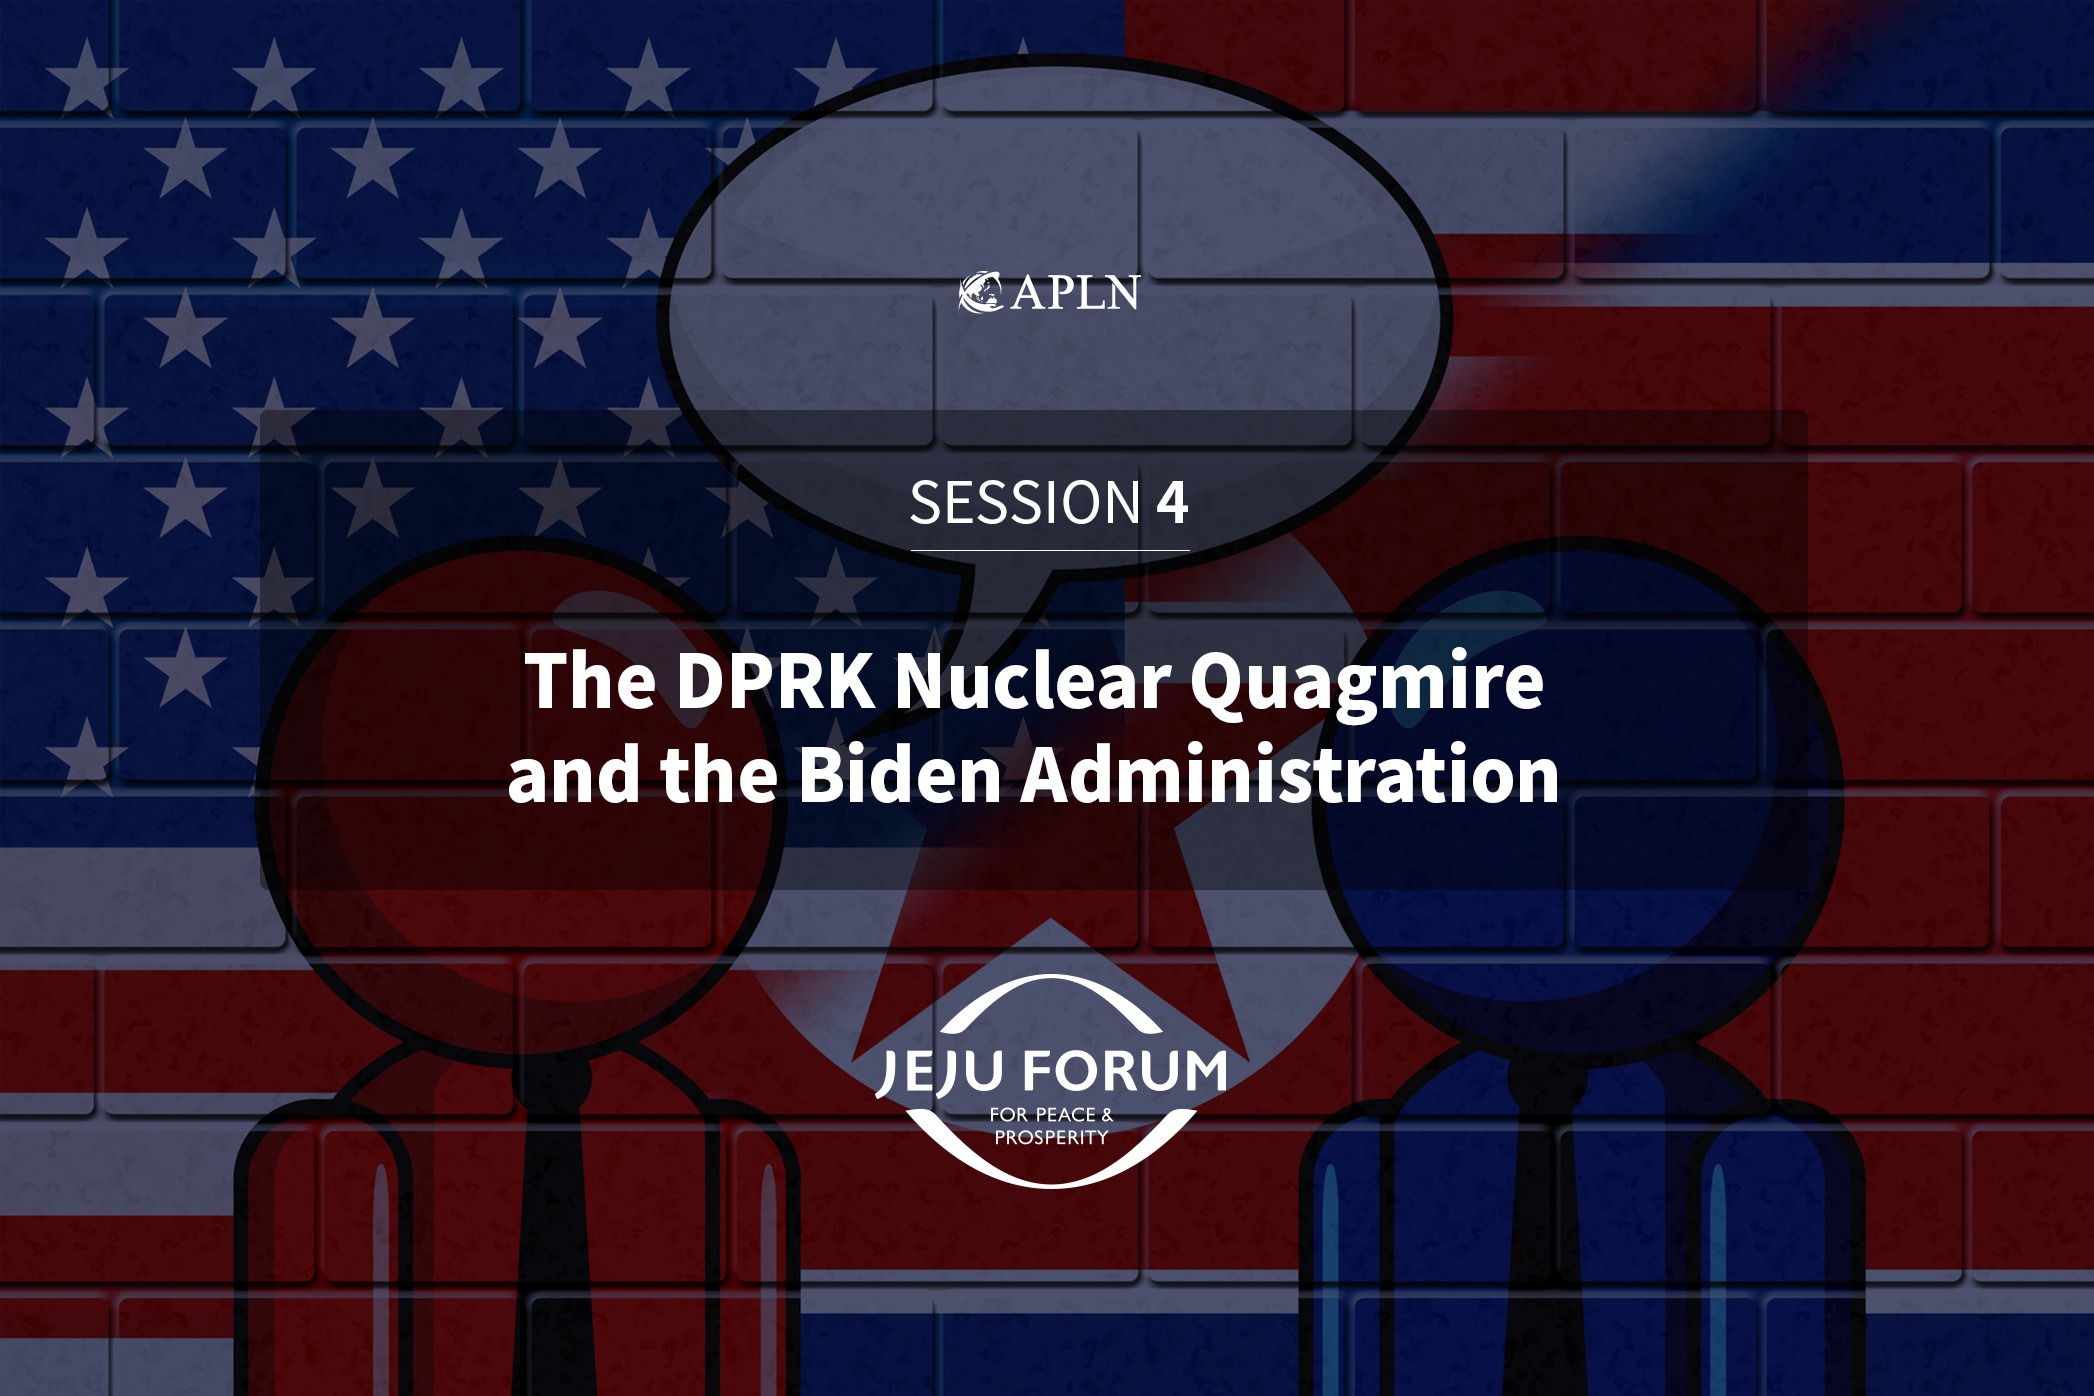 The DPRK Nuclear Quagmire and the Biden Administration